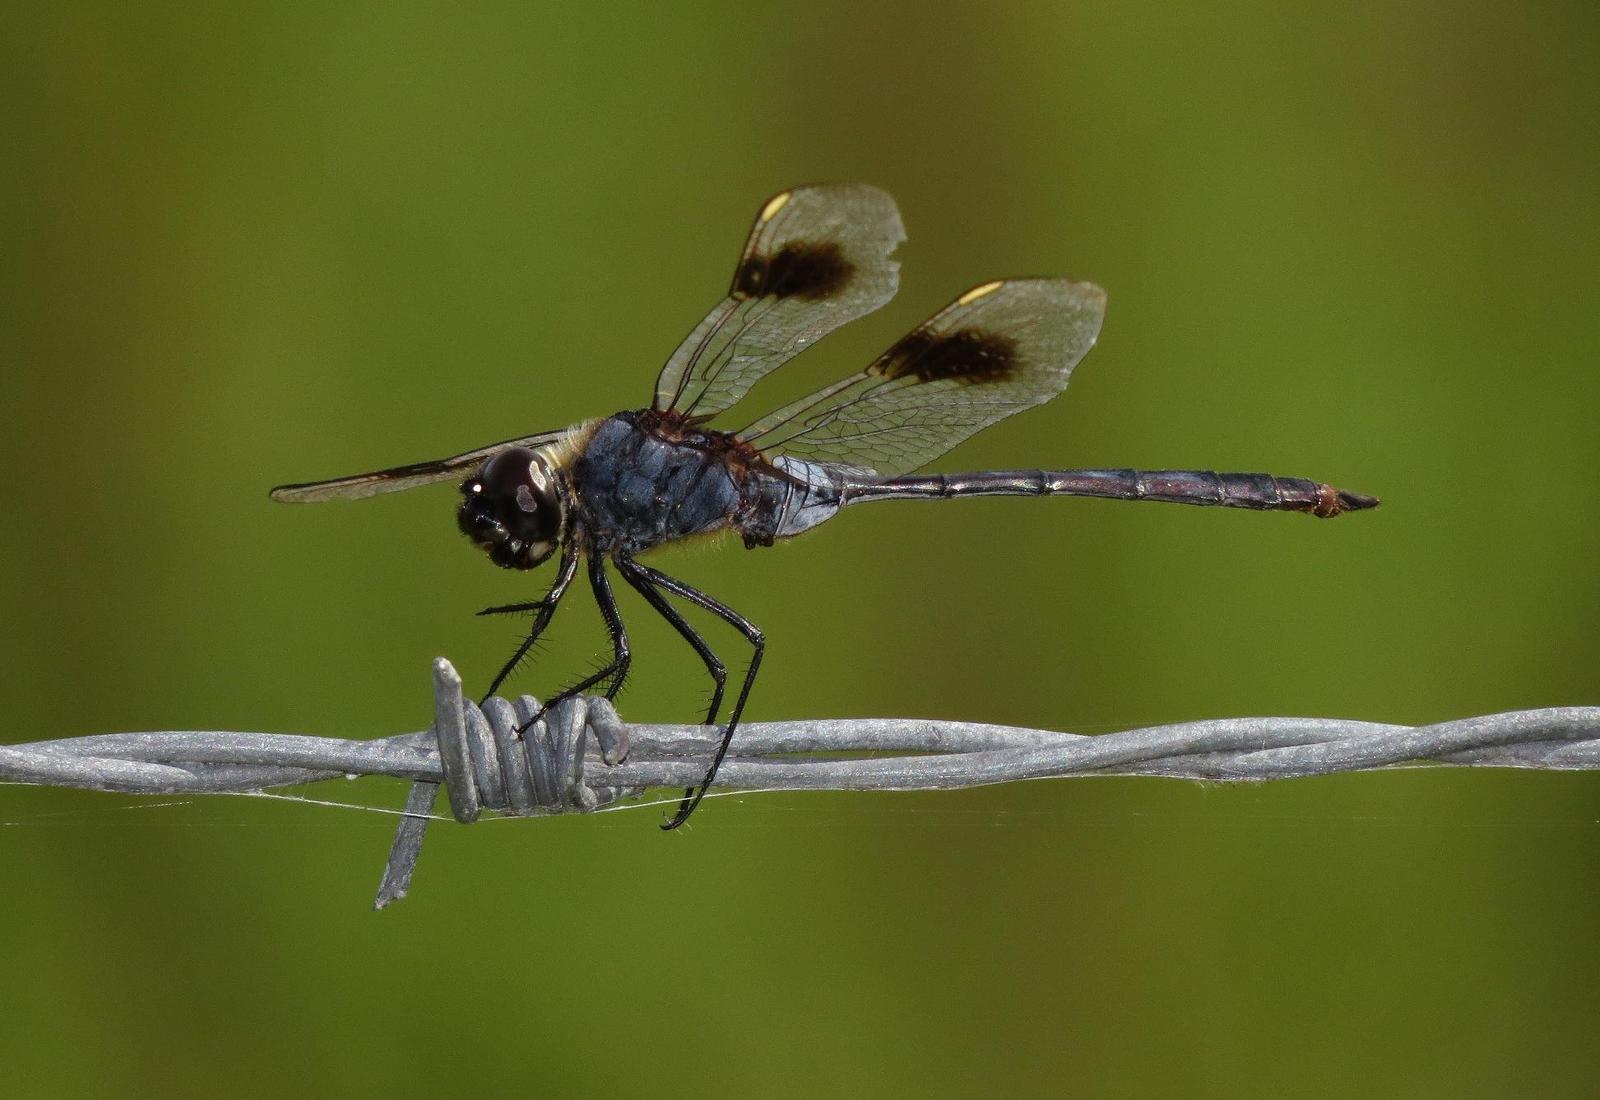 Four-spotted Pennant Photo by Victor Fazio